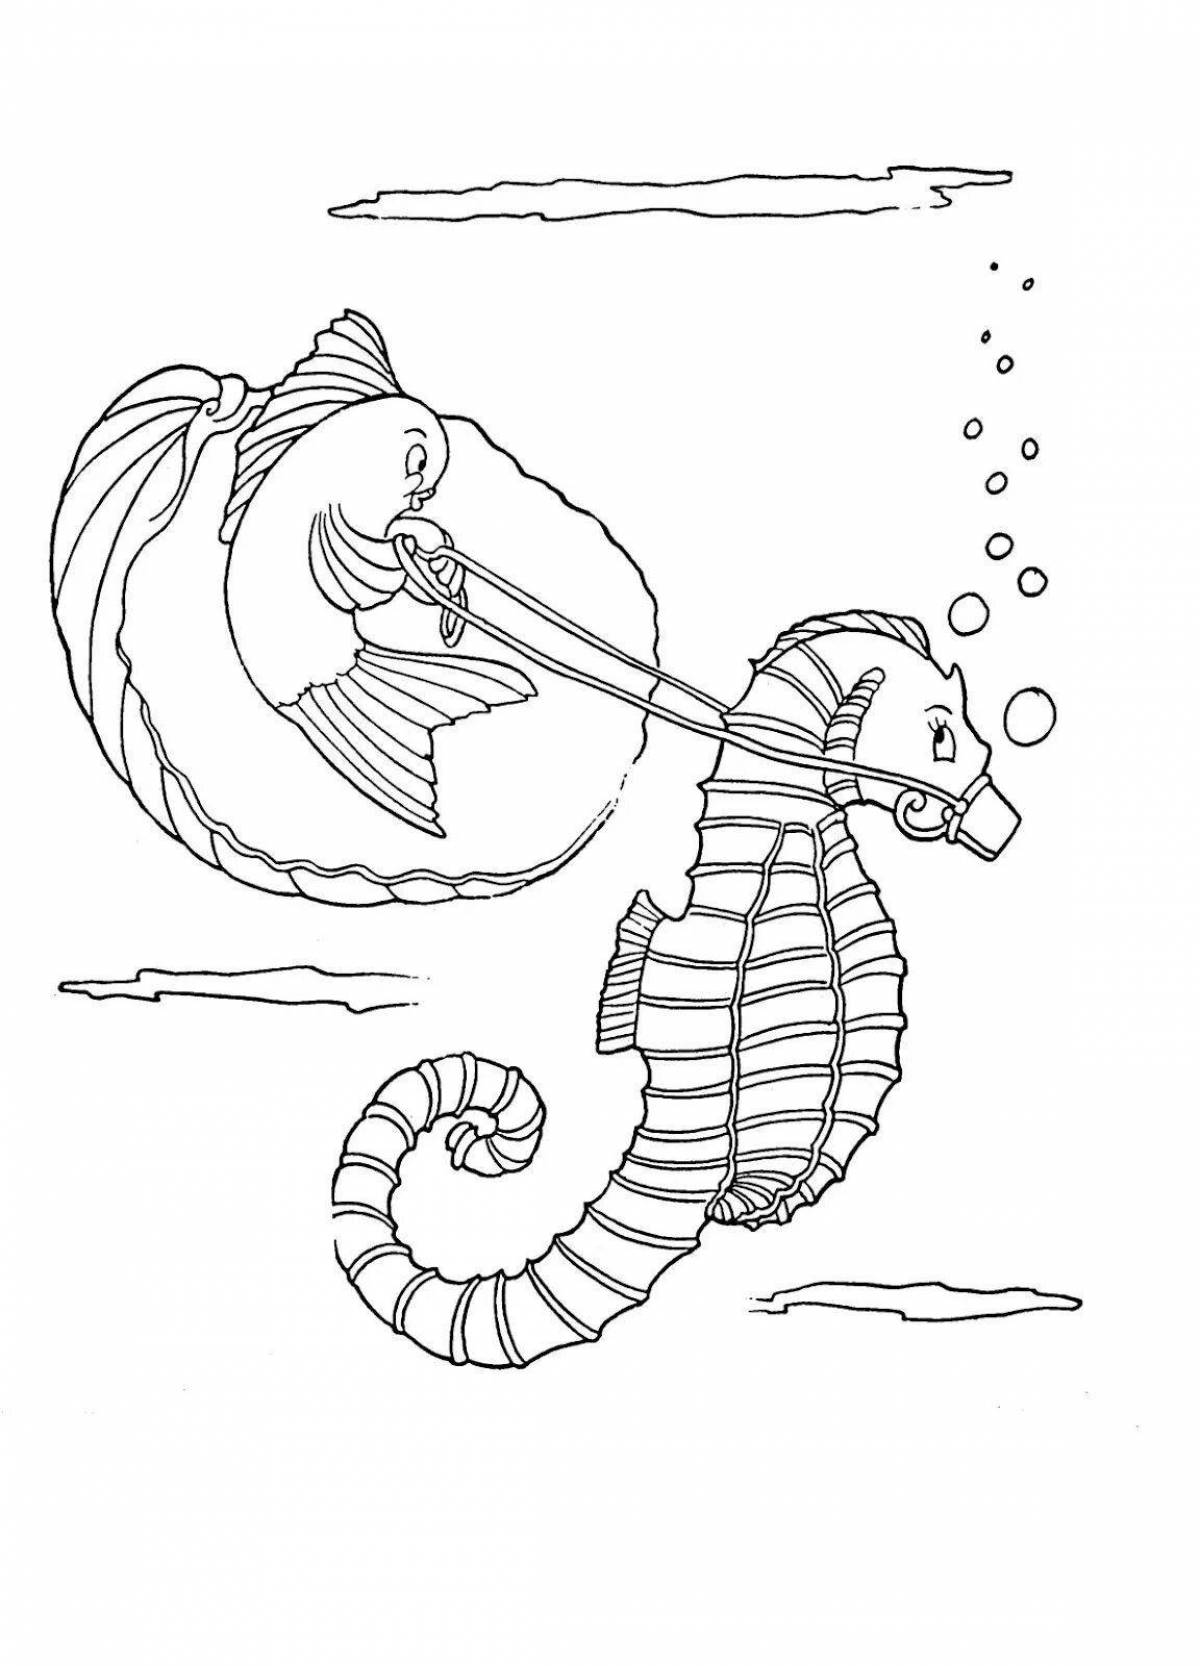 Seahorse holiday coloring book for kids